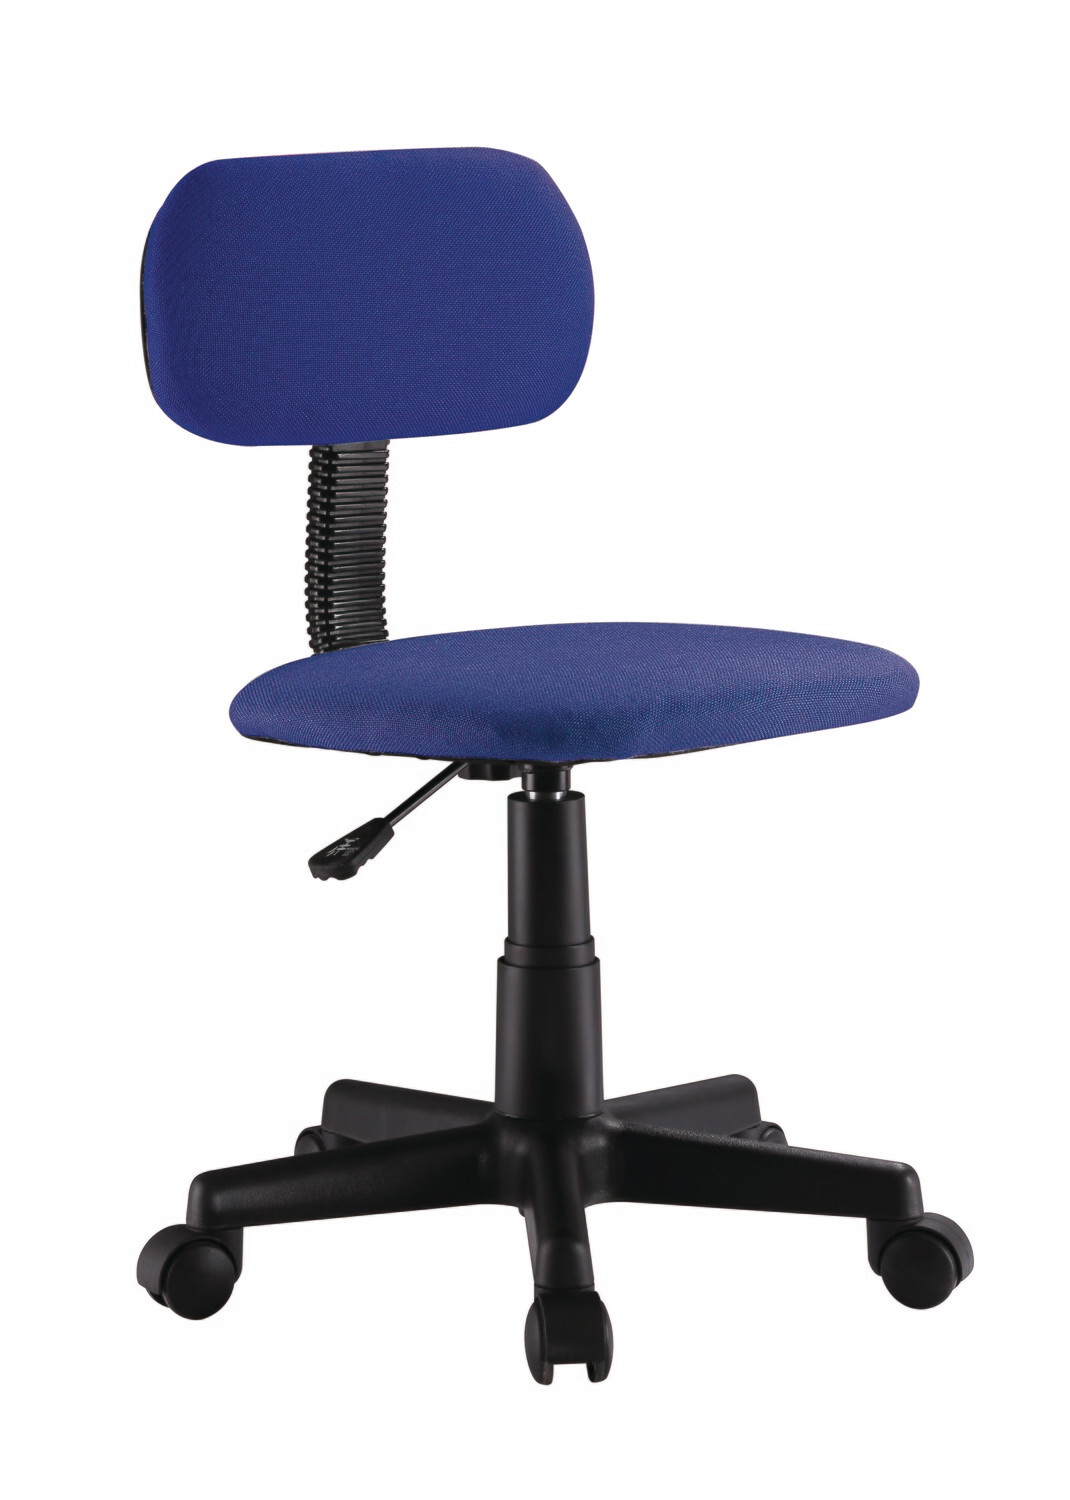 Basic Height Adjustable Study Chair for Kids - Blue